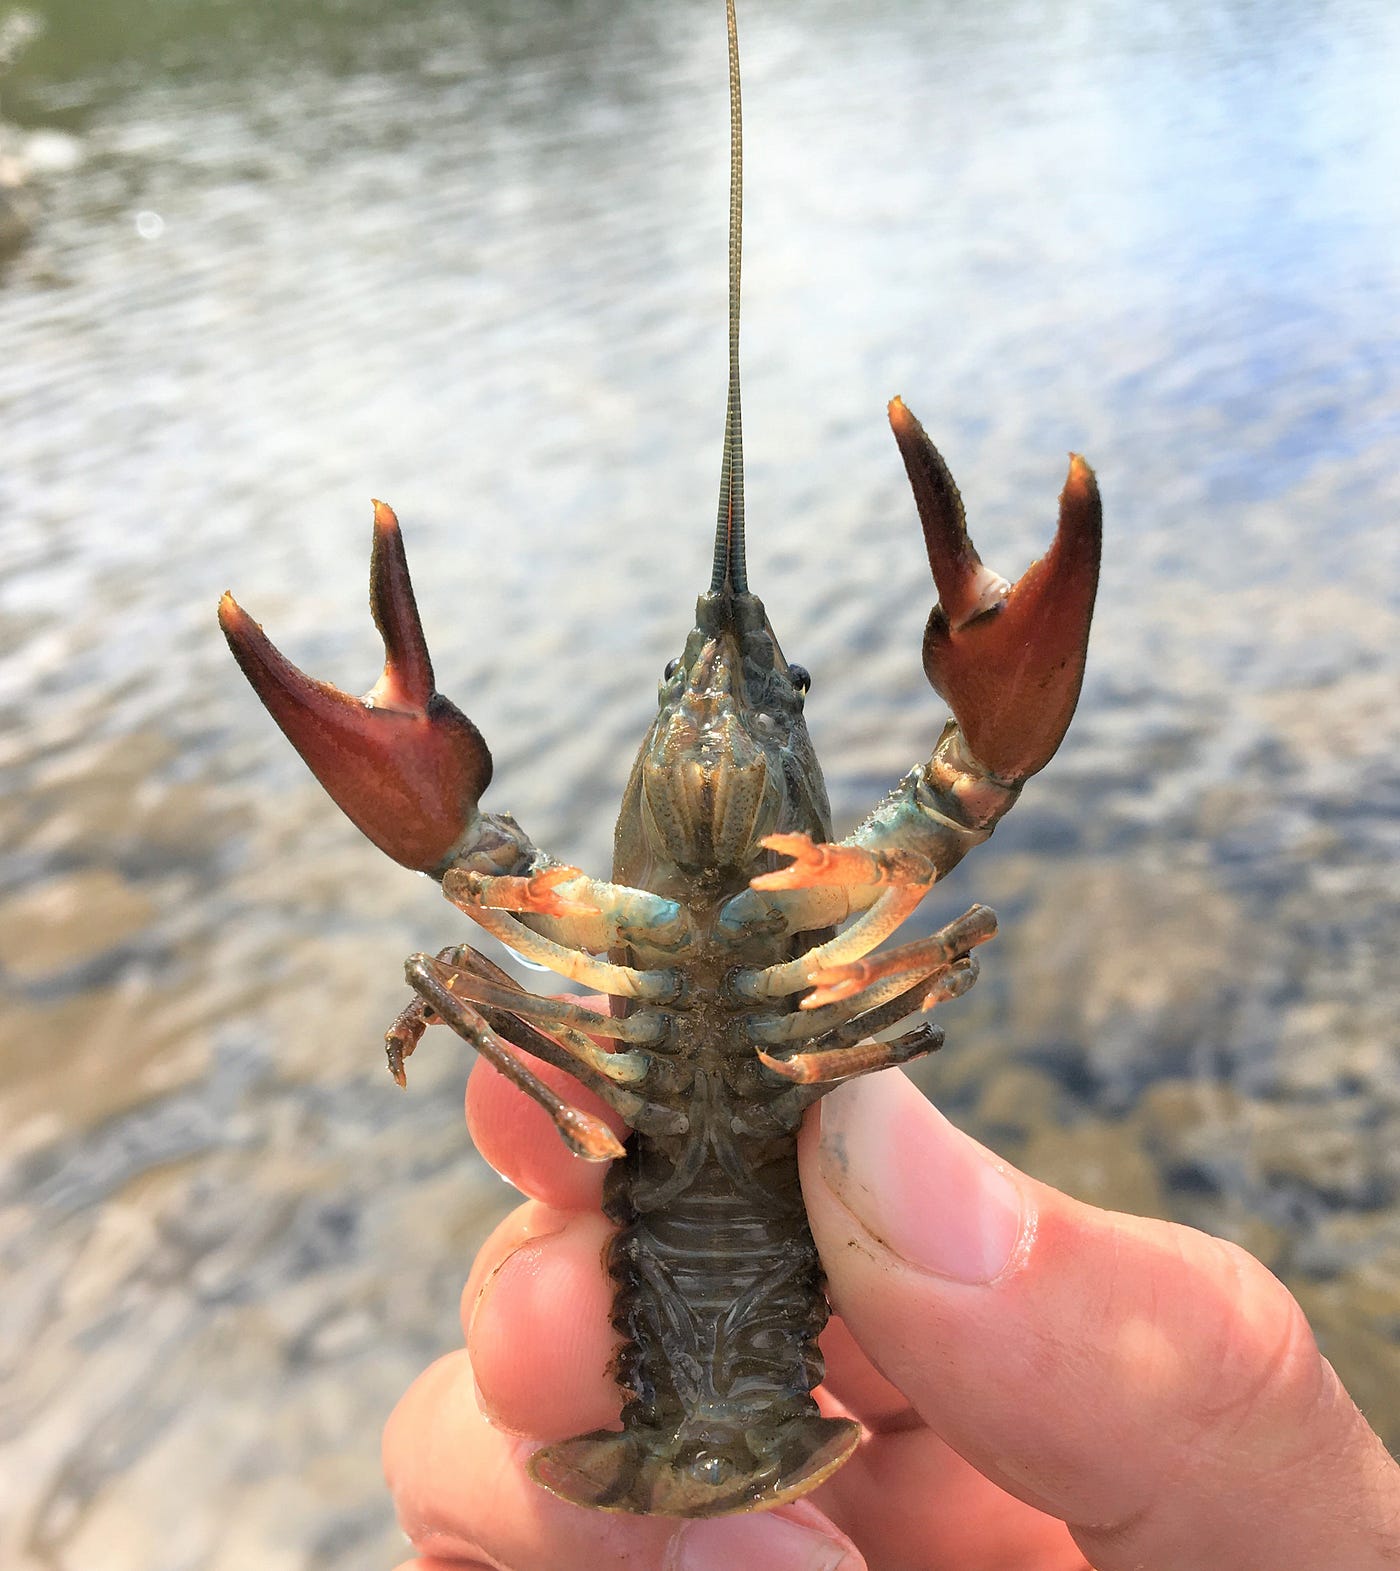 Bad 'dads: Crawdads of Kodiak. A conversation about crayfish in